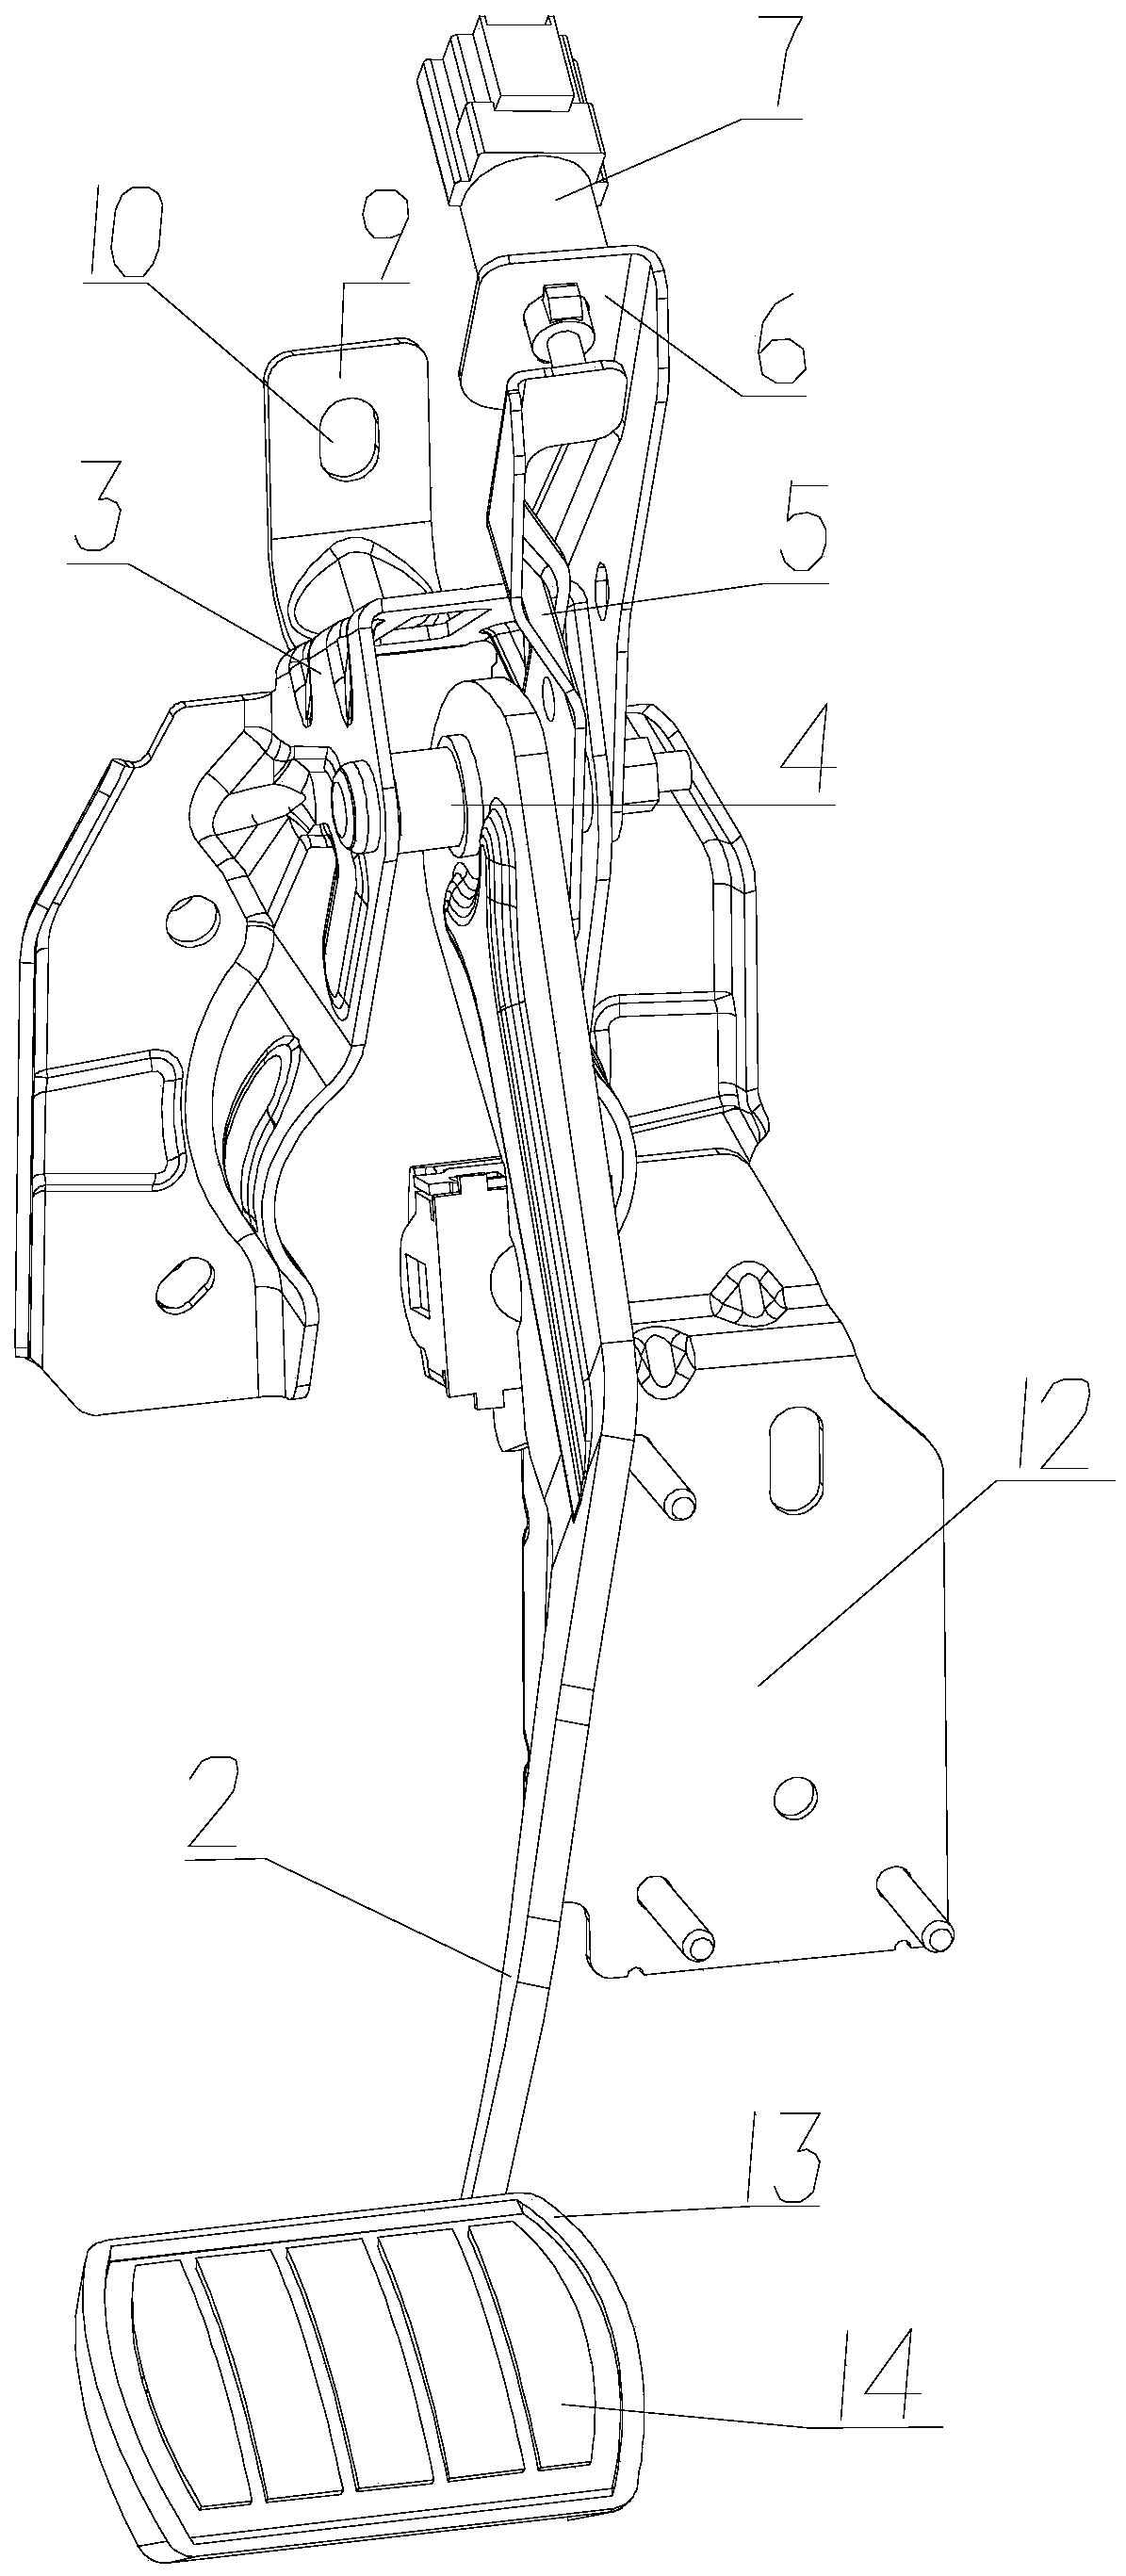 Brake pedal structure capable of protecting shanks and feet of driver